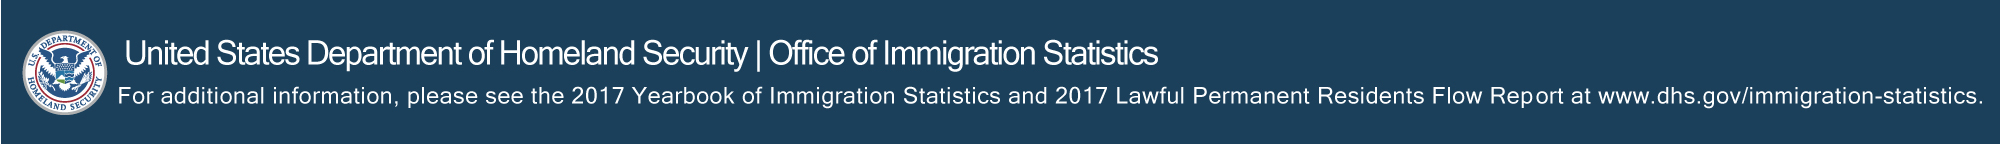 United States Department of Homeland Security, Office of Immigraiton Statistics. For additional information, please see the 2017 Yearbook of Immigration Statistics and 2017 Lawful Permanent Residents Flow report at www.dhs.gov/immigration-statistics.